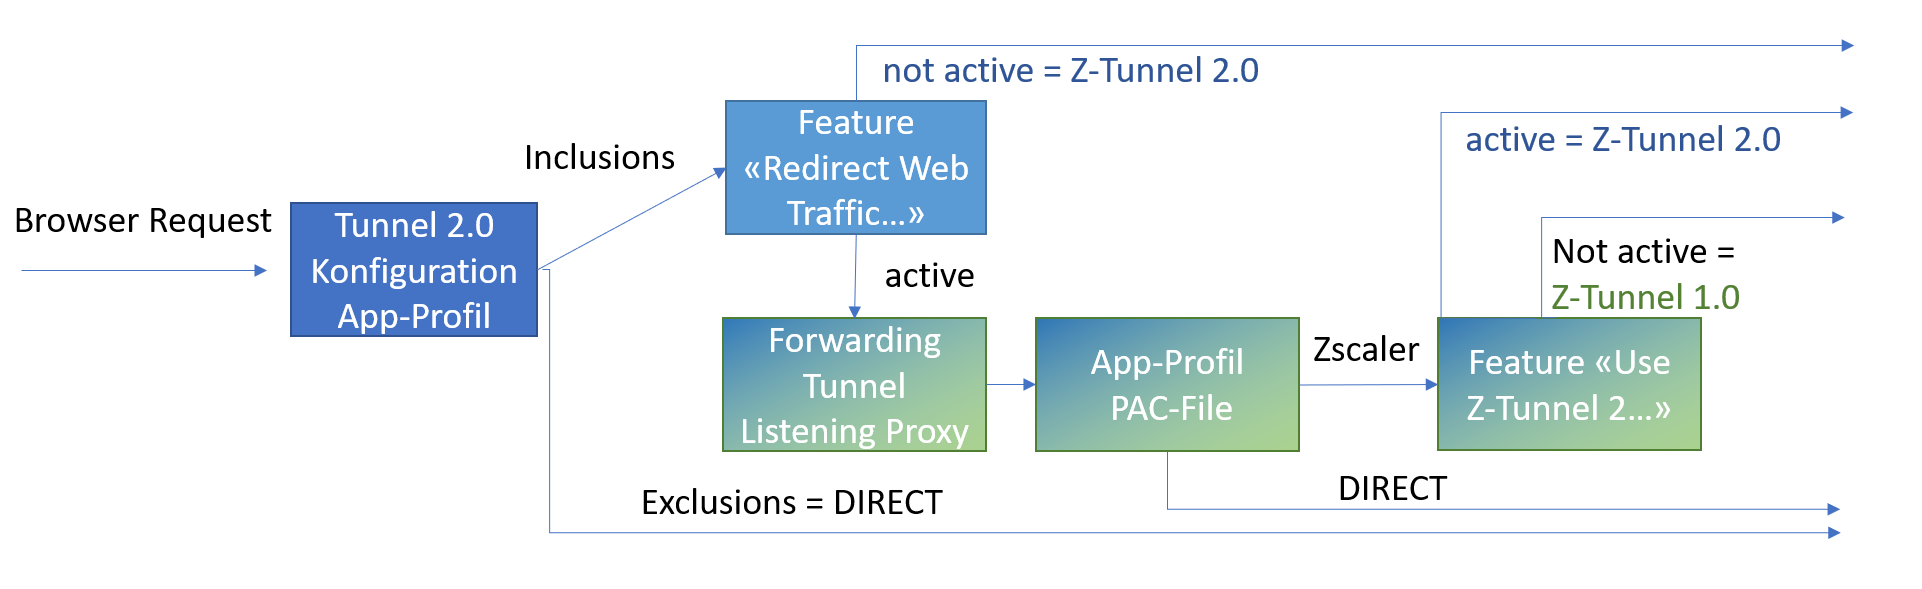 Forwarding mit den Features «Redirect Web Traffic to Zscaler Client Connector Listening Proxy» und «Use Z-Tunnel 2.0 for Proxied Web Traffic»